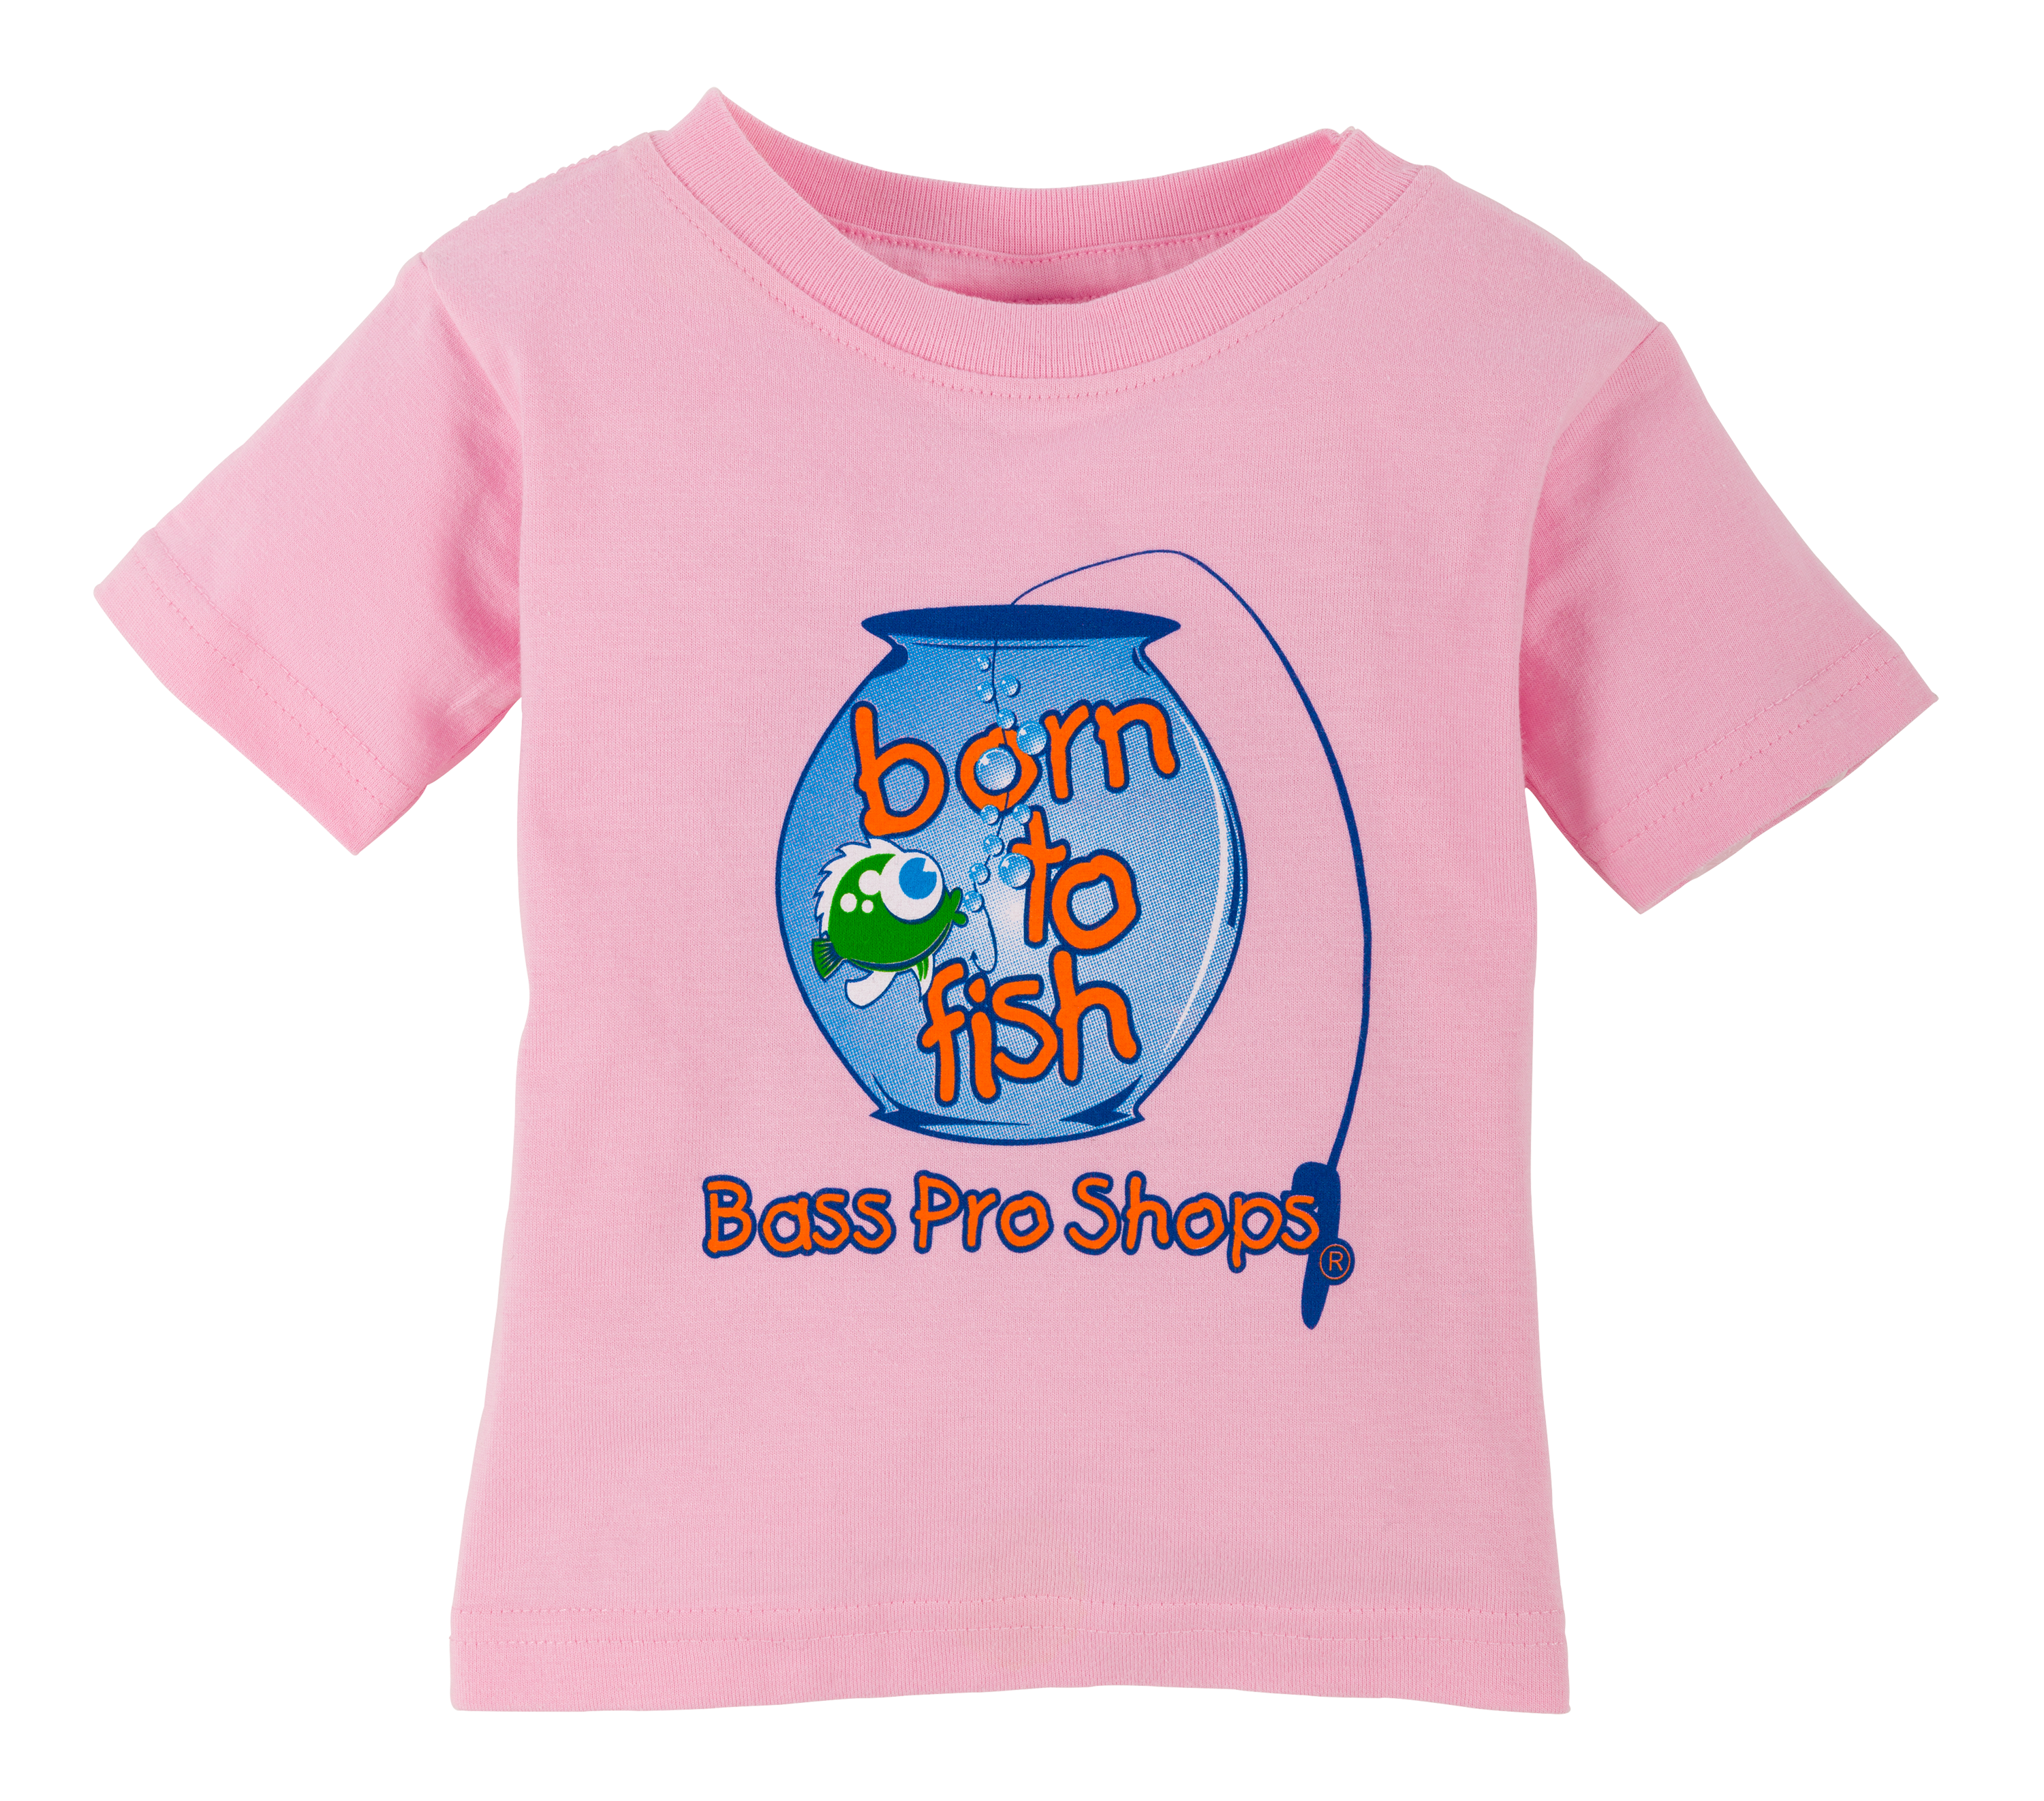 Bass Pro Shops Born to Fish T-Shirt for Babies